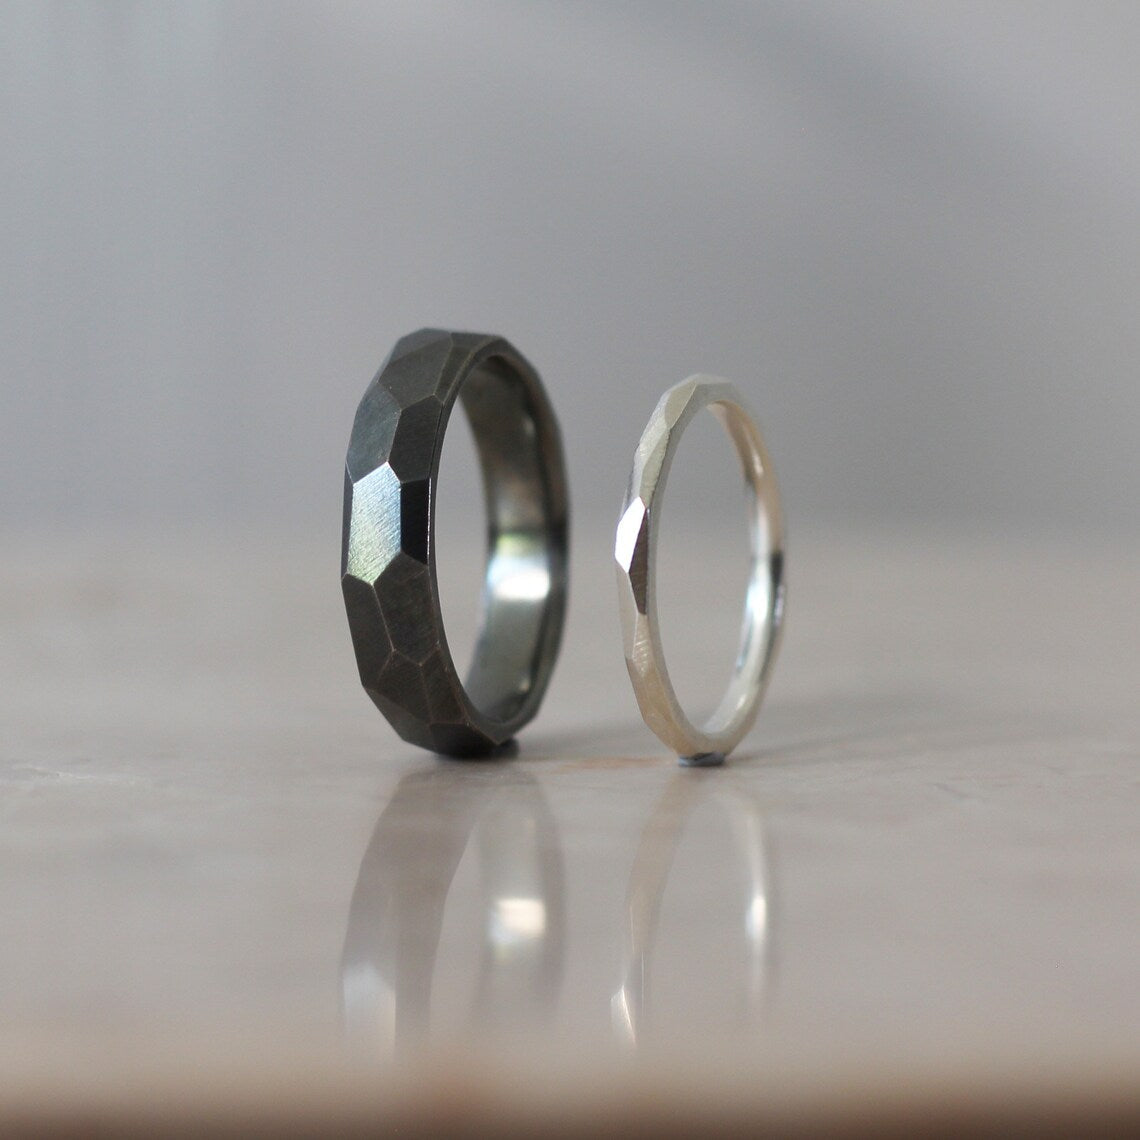 Geometric Faceted Ring 5mm - Silver/Oxidised